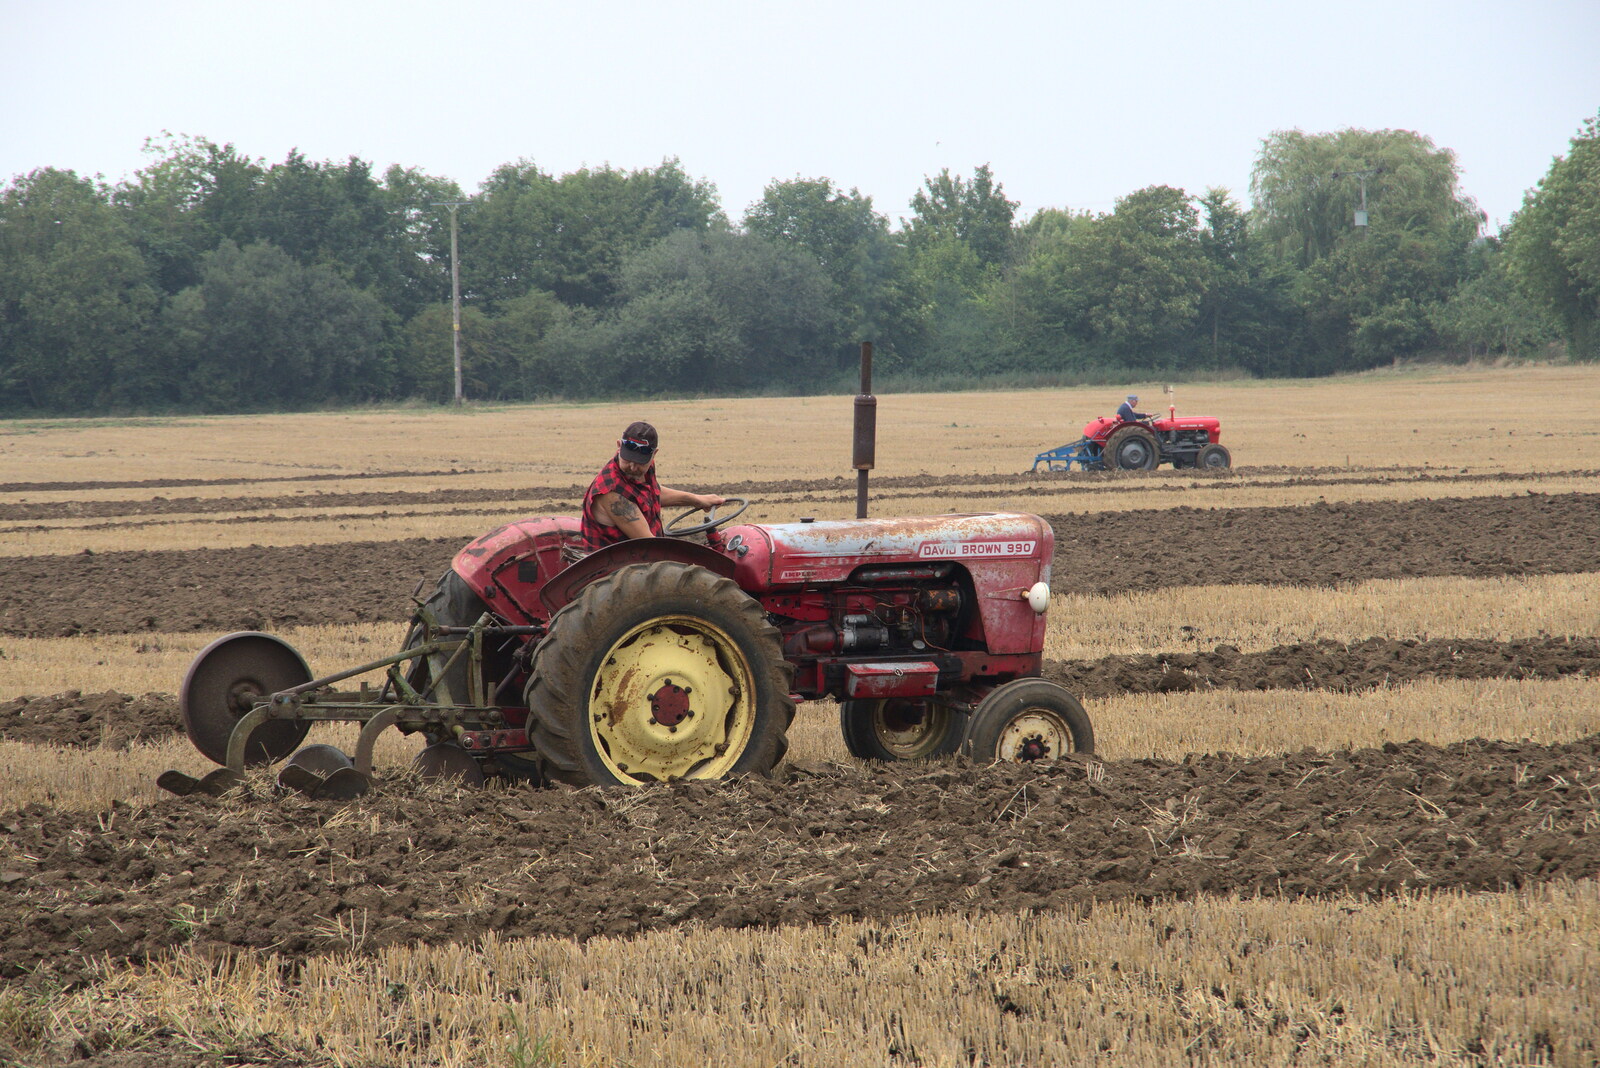 Vintage Tractor Ploughing, Thrandeston, Suffolk - 26th September 2021: Elsewhere, a David Brown does some ploughing